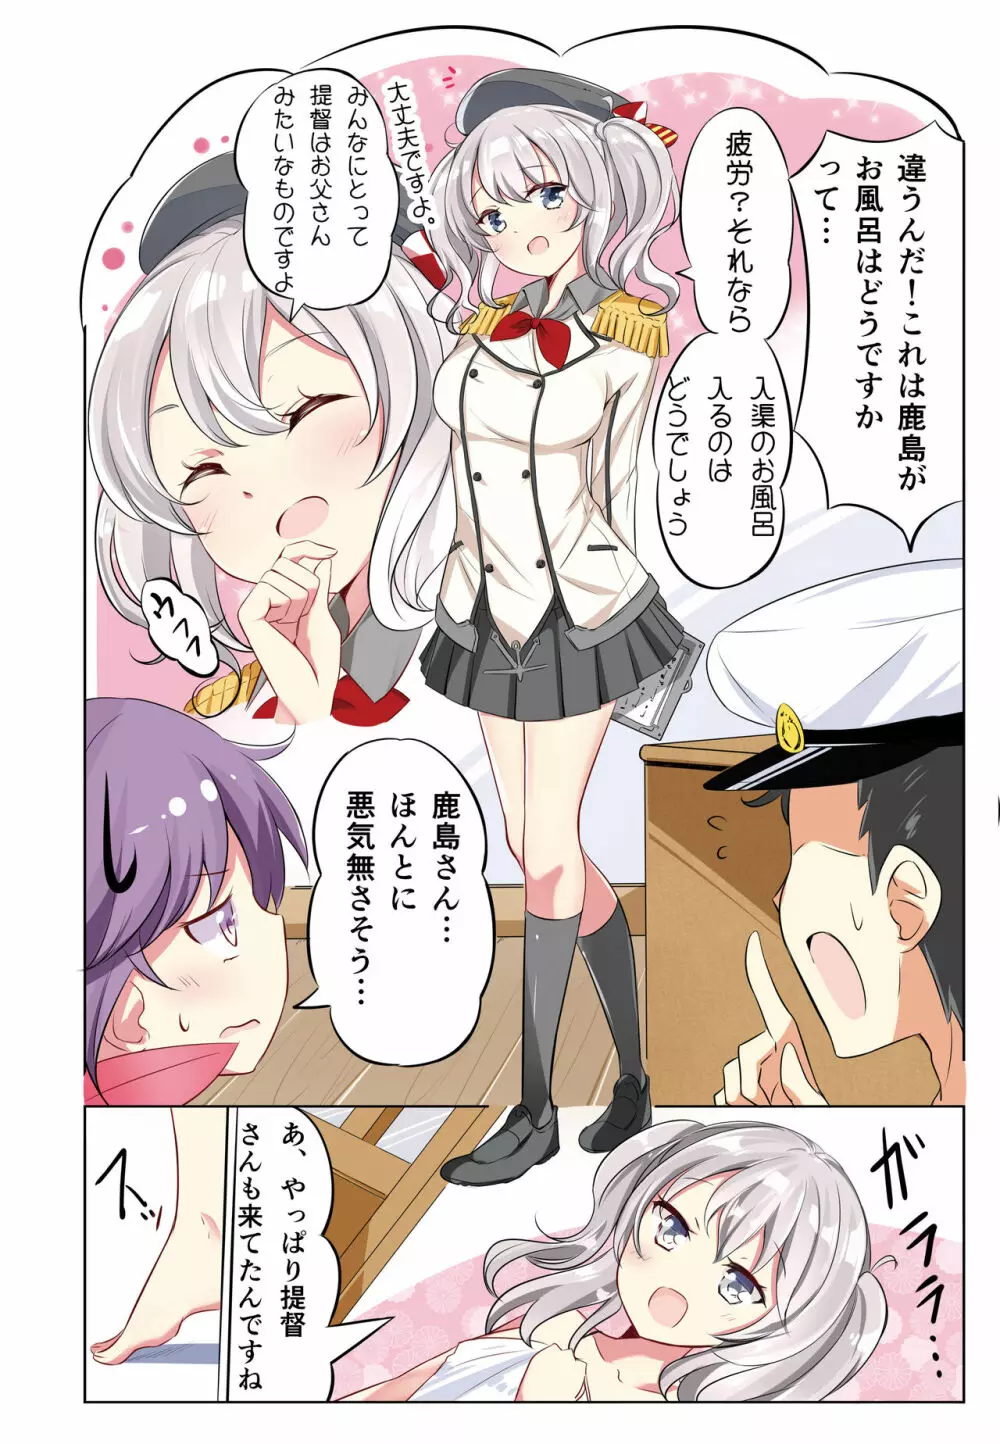 hamaken collection 総集編vol 9～12 プラス 七駆の乳くらべ Page.53